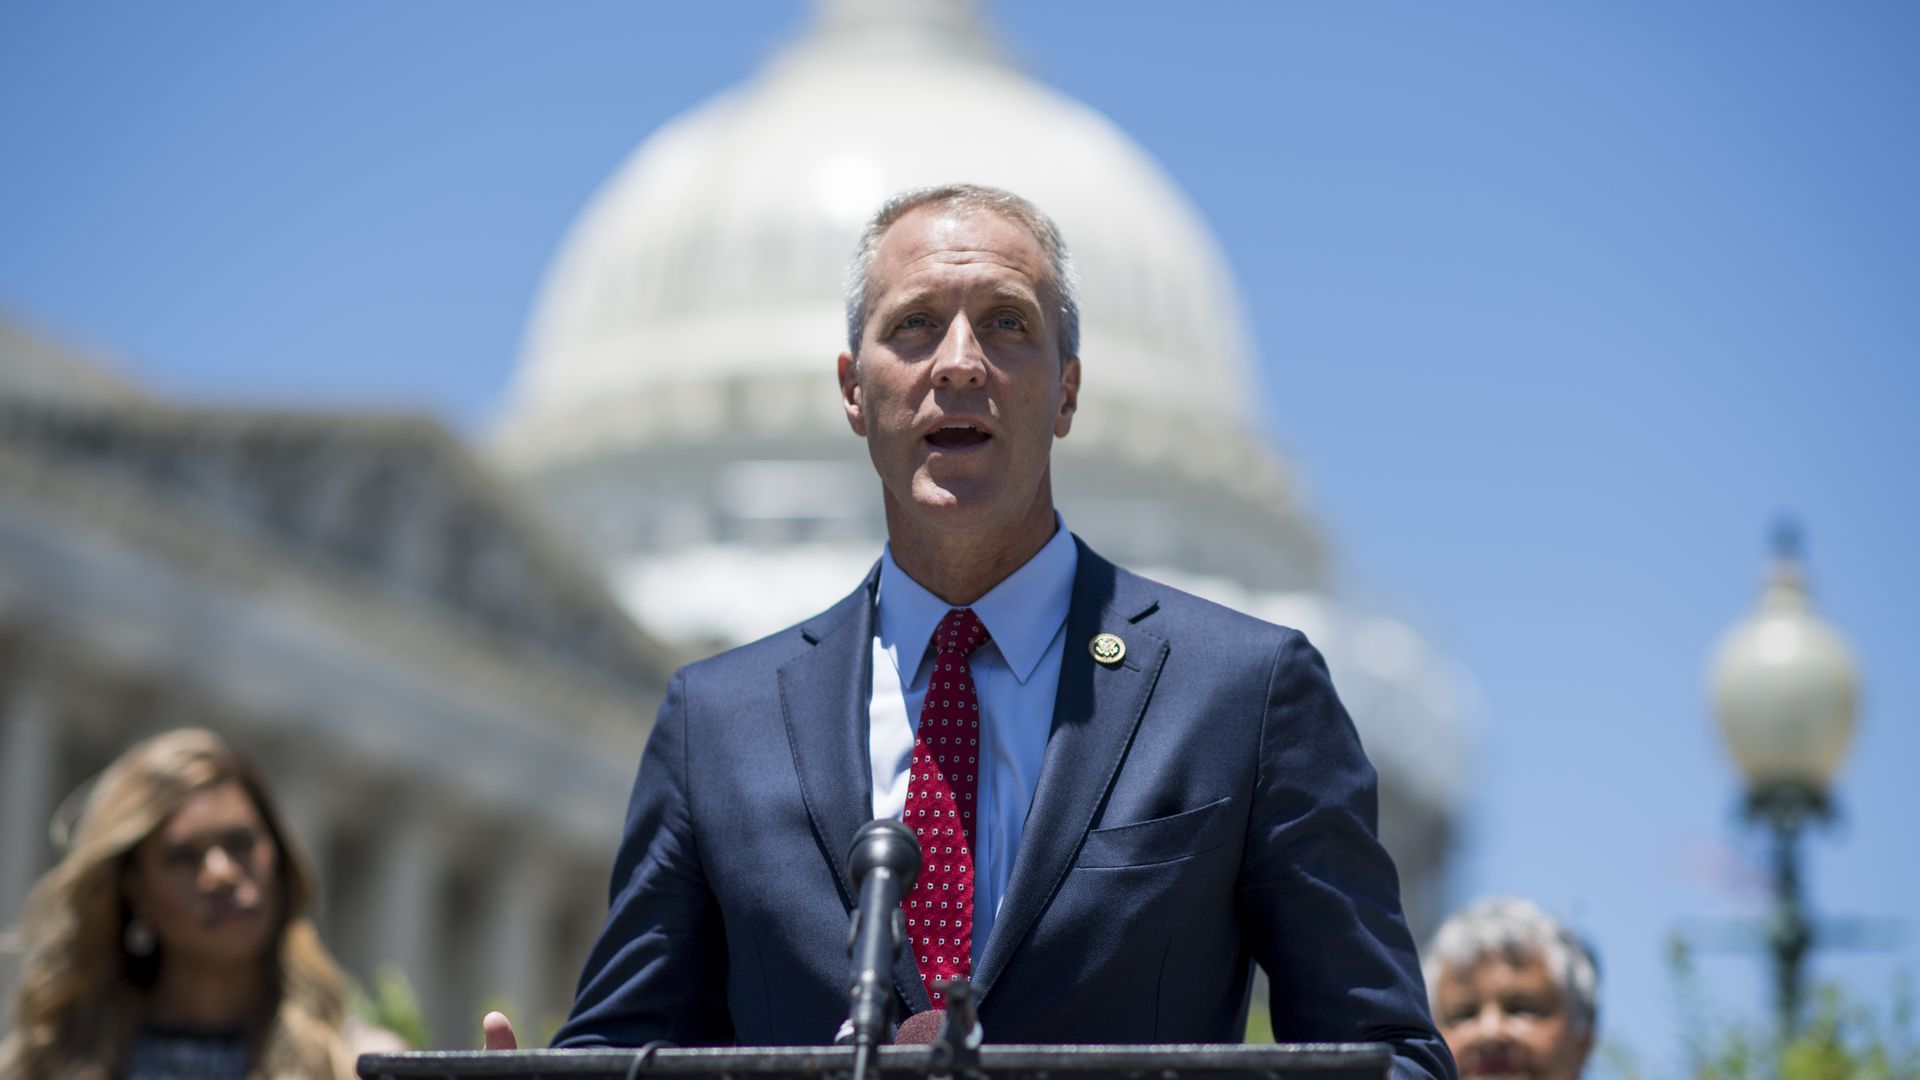 Representative Sean Patrick Maloney speaks at a news conference in front of the U.S. Capitol.